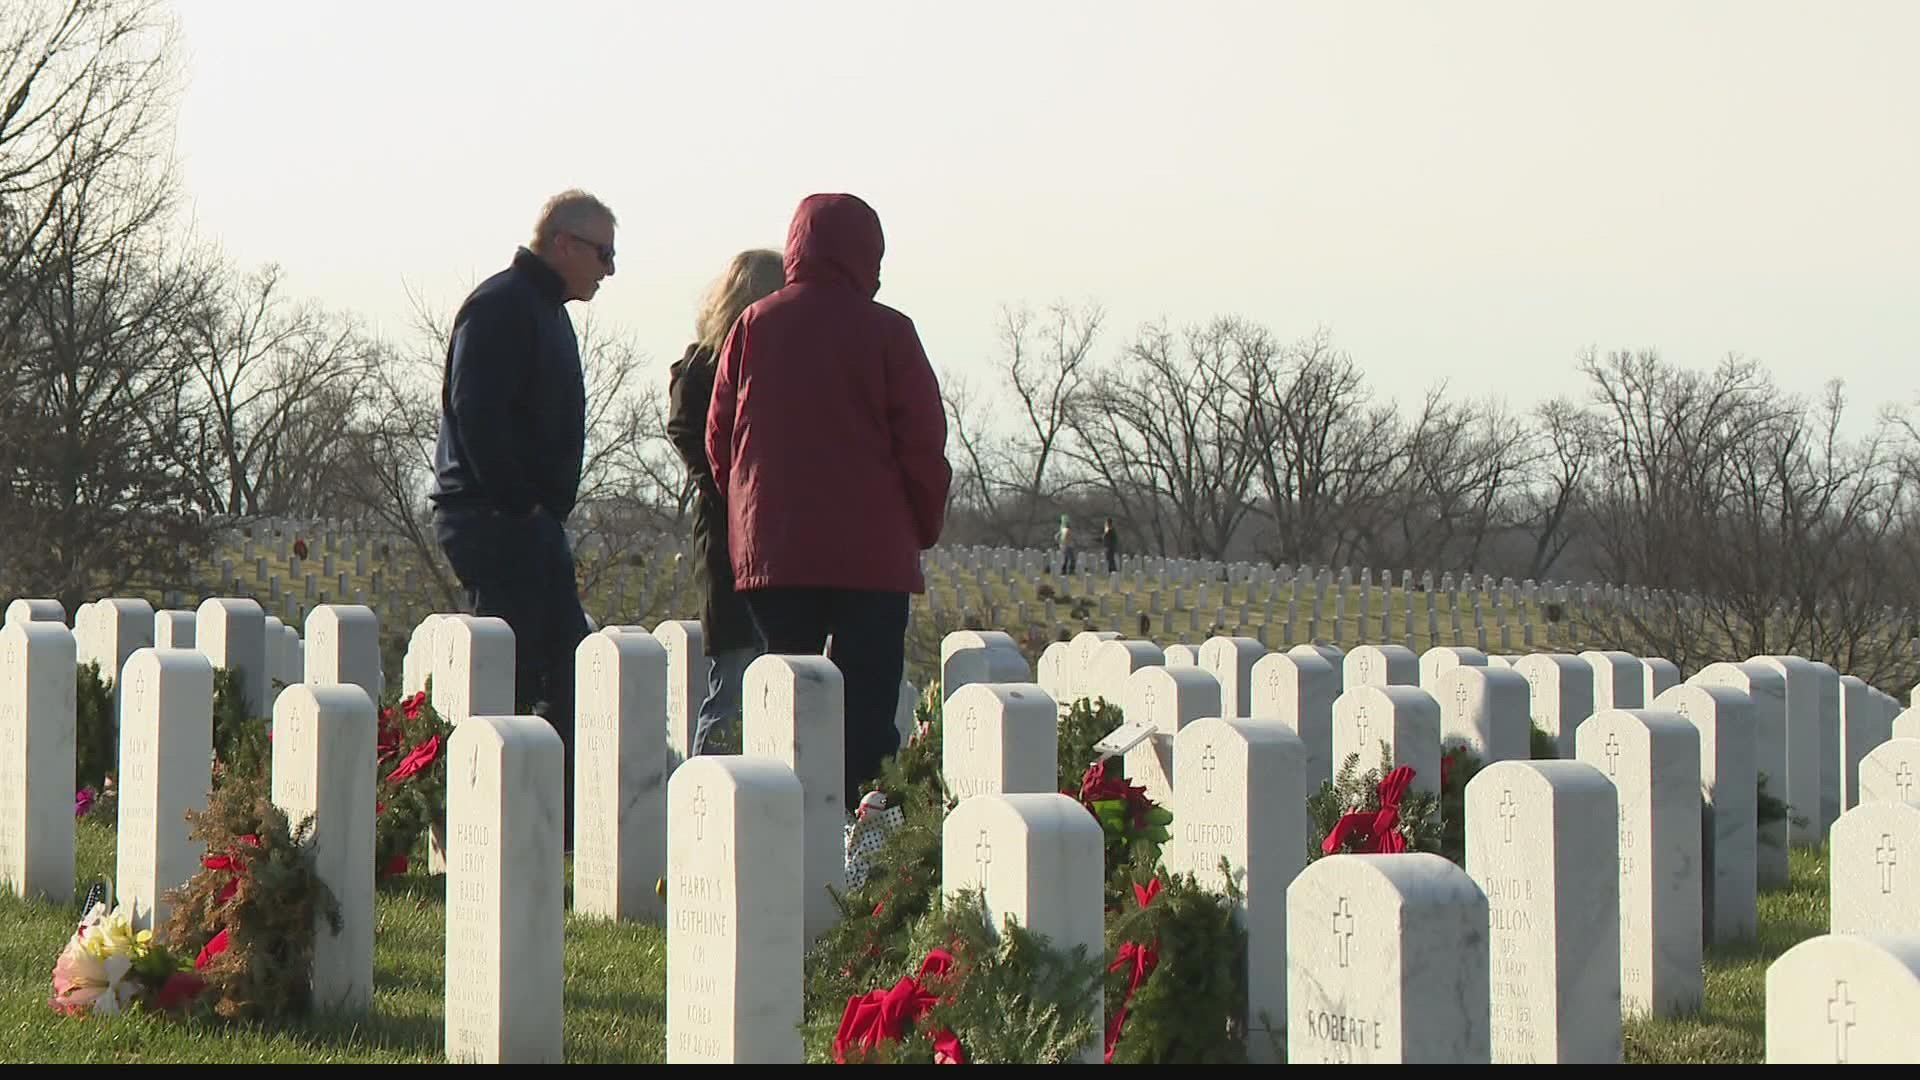 The organization is short of its fundraising goal, but you can help. They lay handmade wreaths on headstones at Jefferson Barracks.